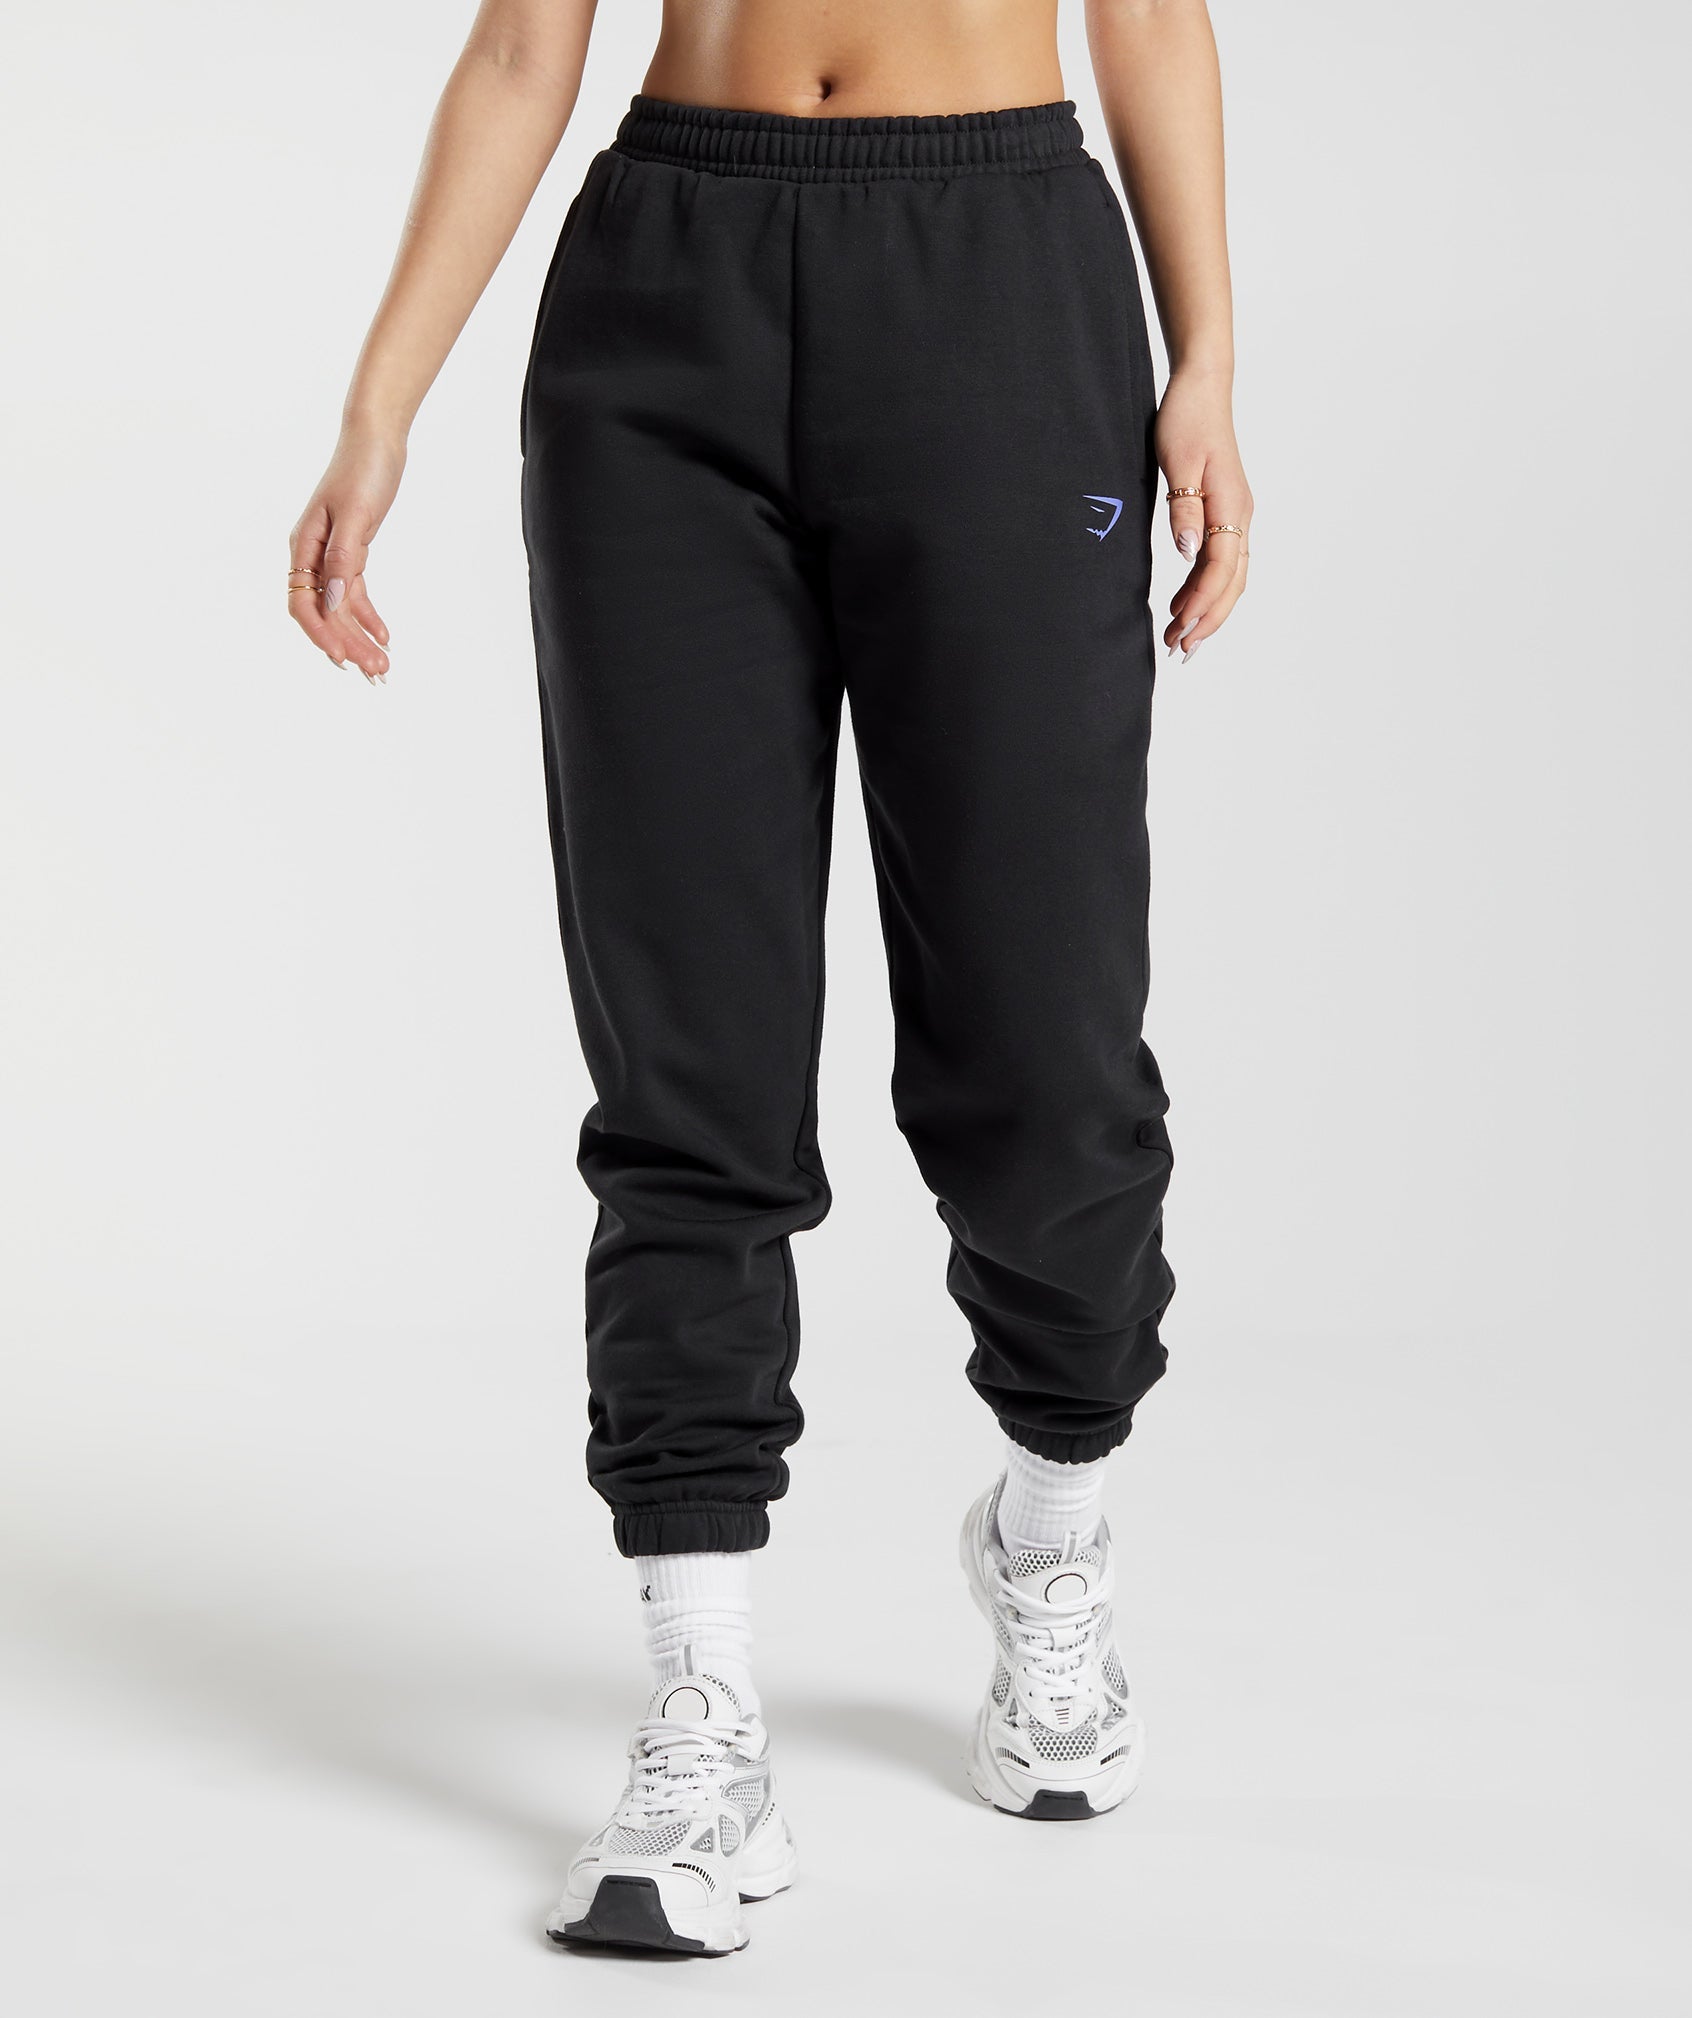 Maxed Out Joggers in Black - view 2